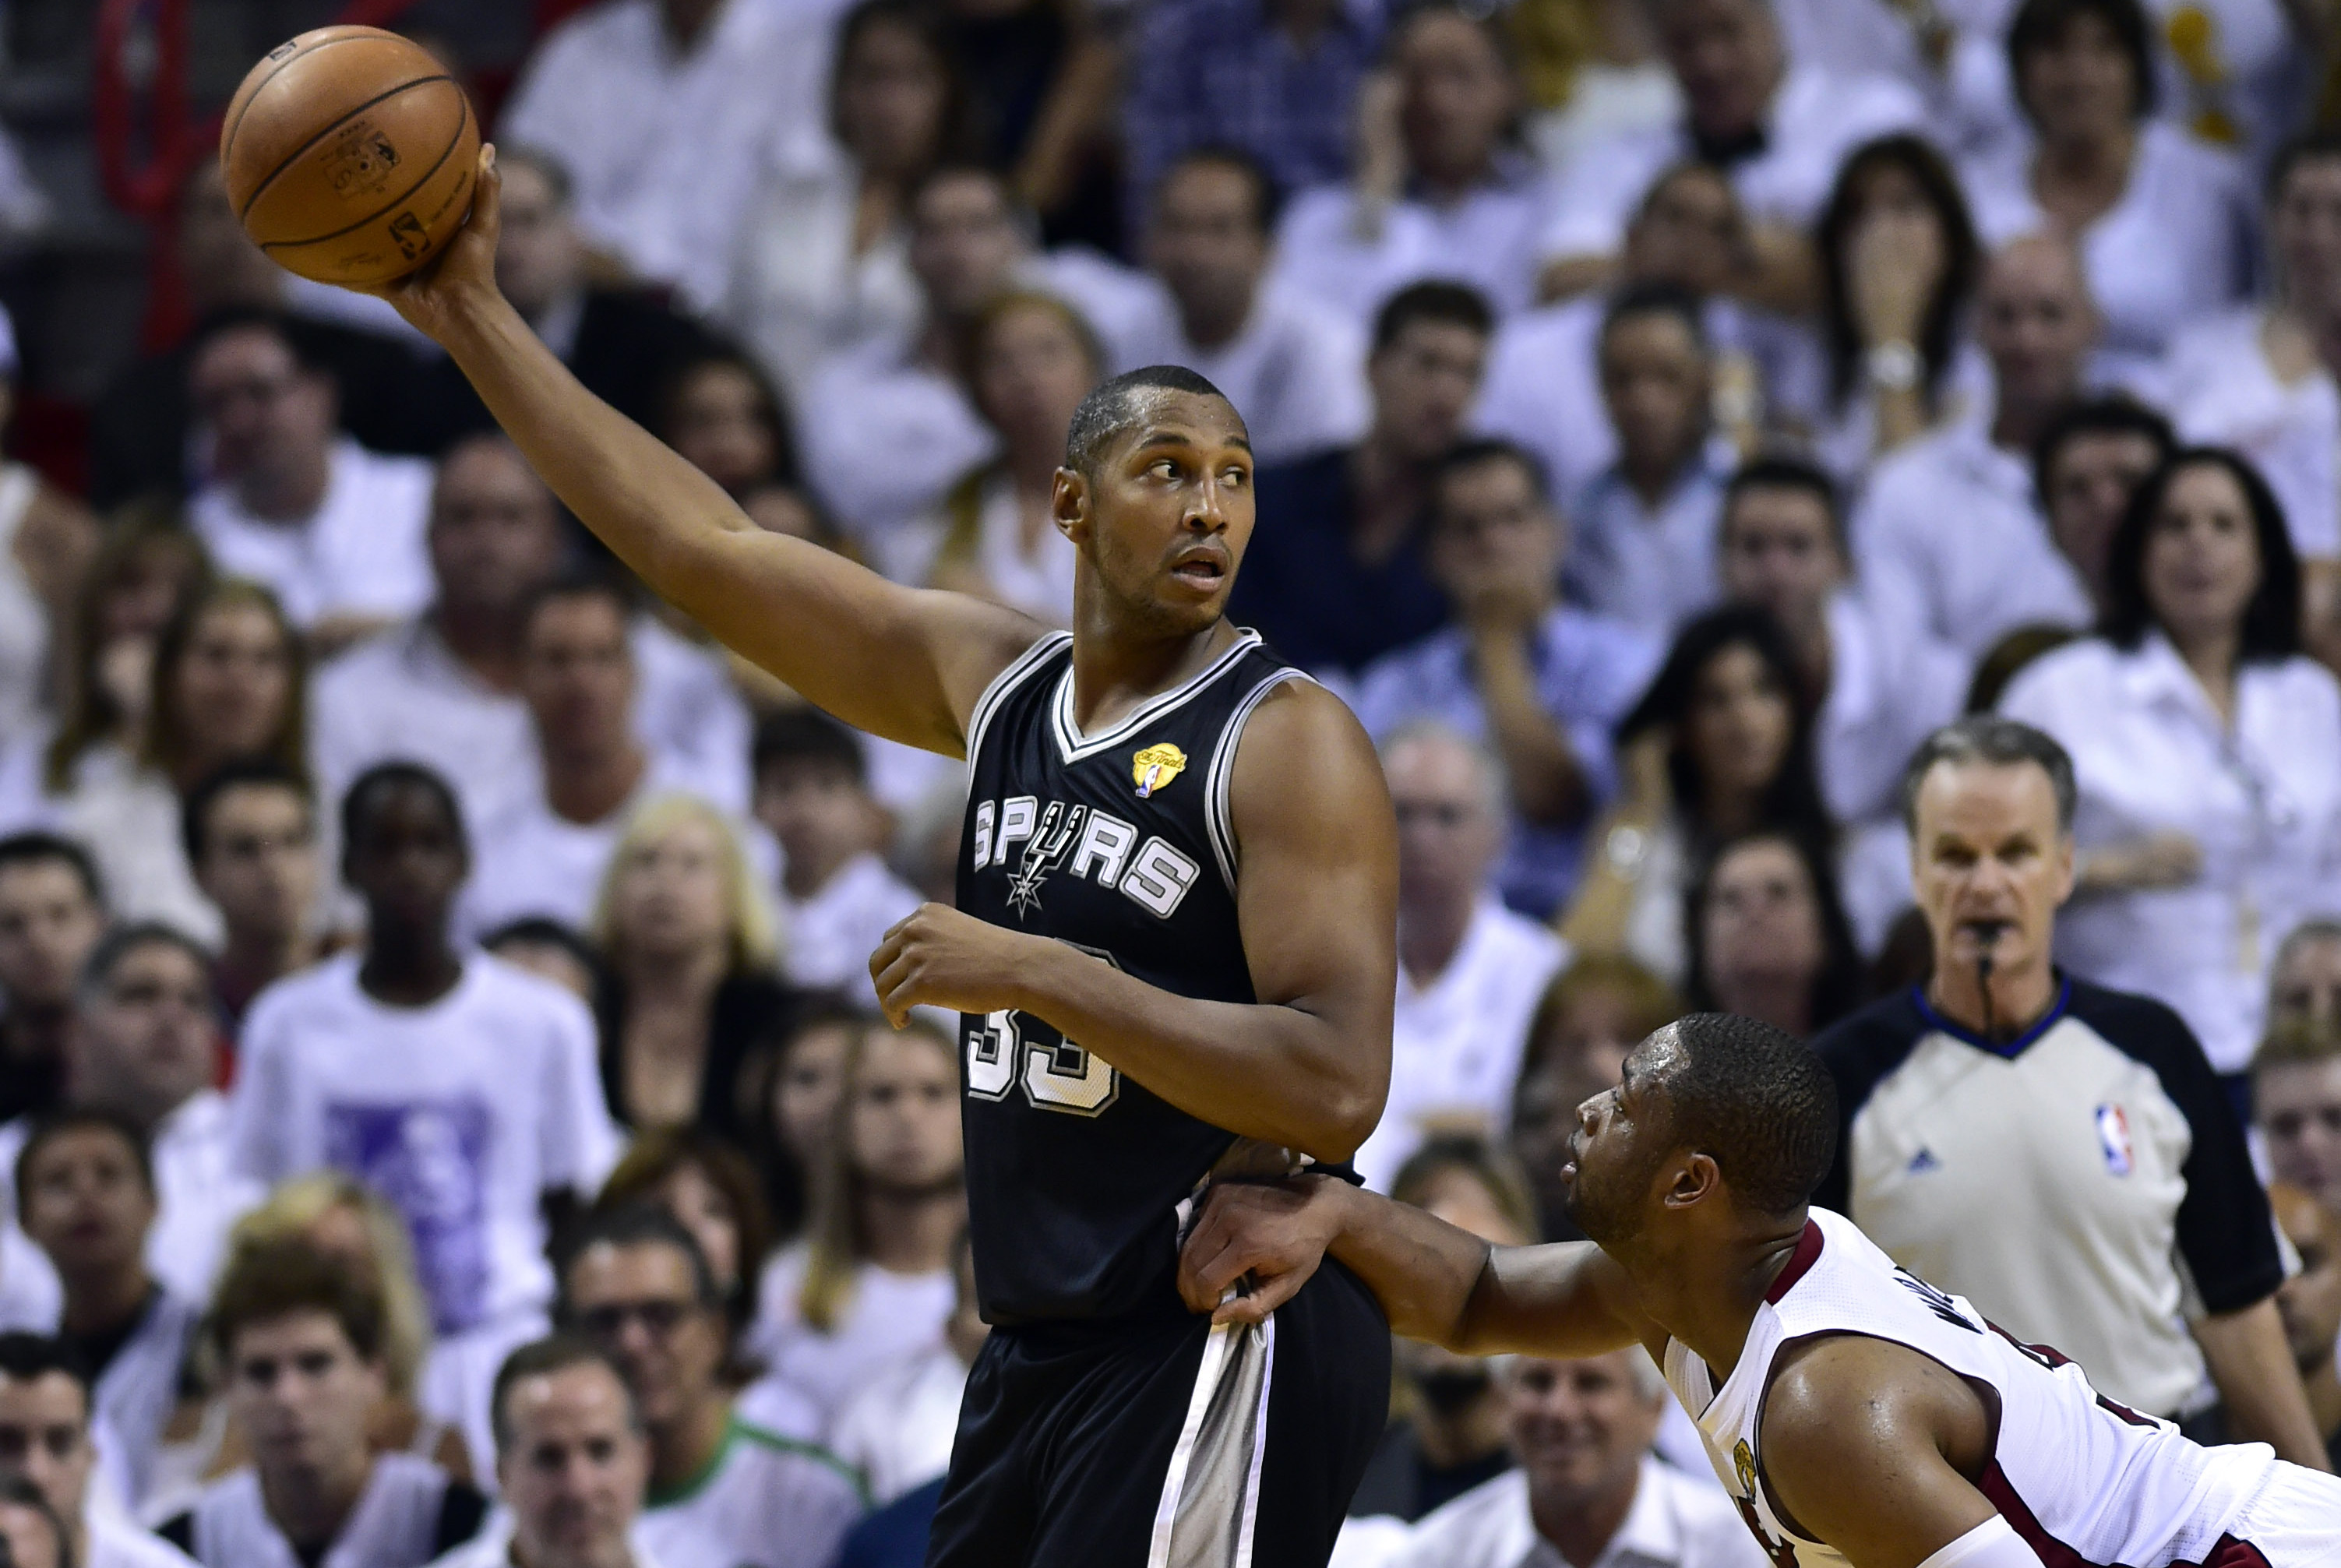 Diaw provided Spurs with an extra kick